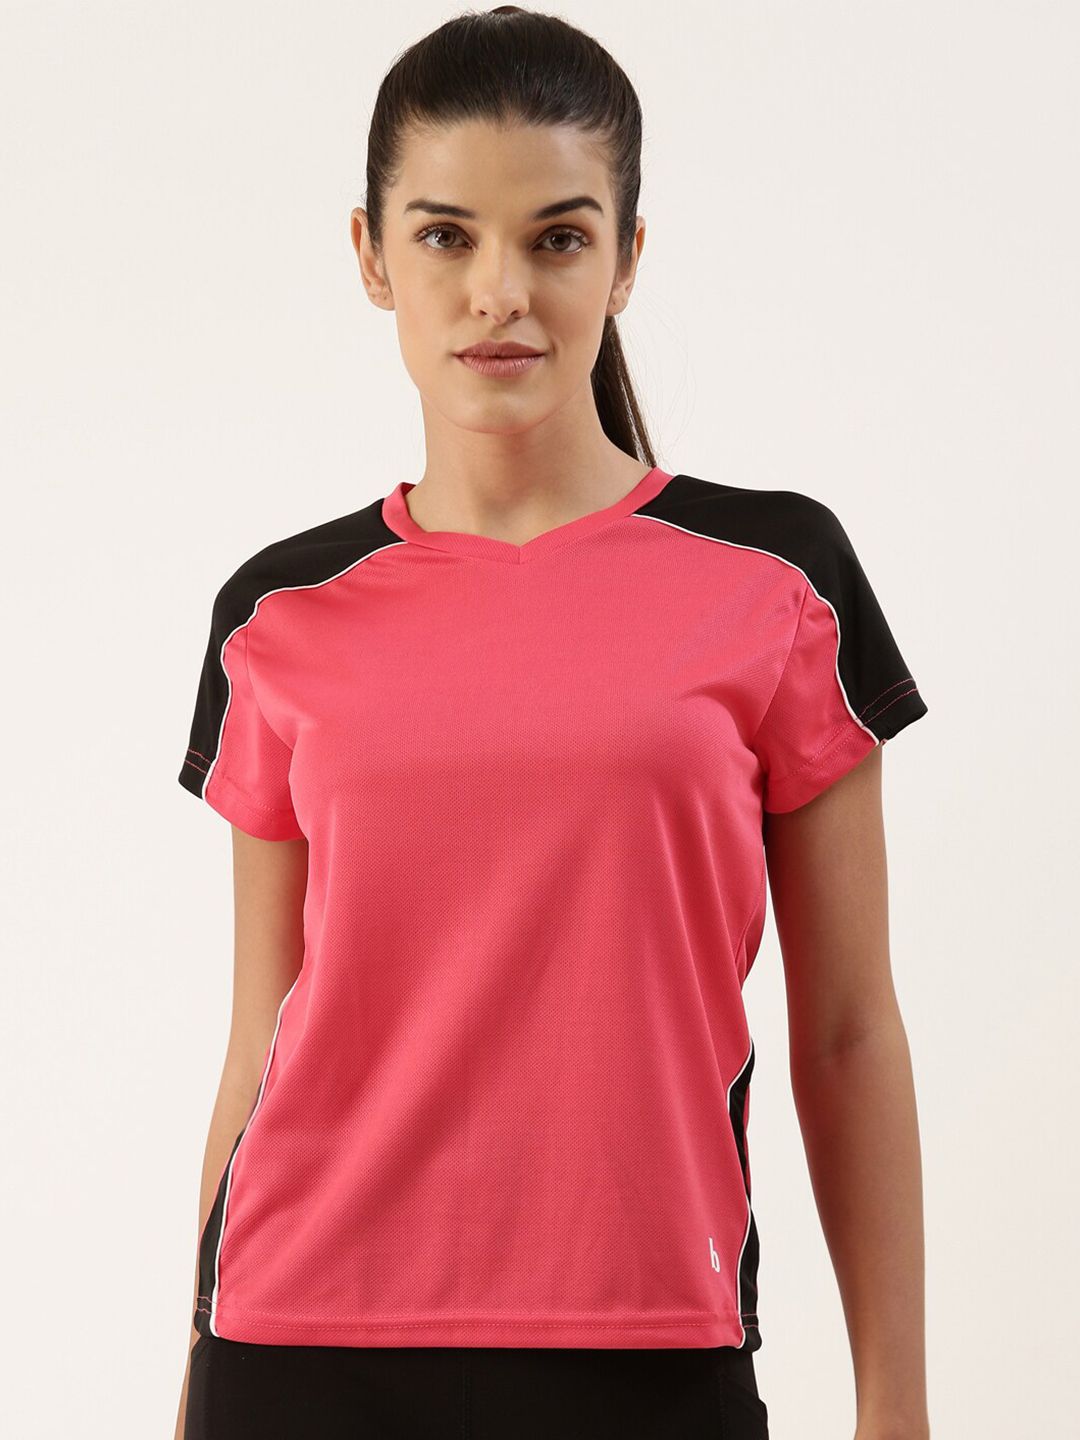 Bannos Swagger Women Pink Anti Static T-shirt Price in India